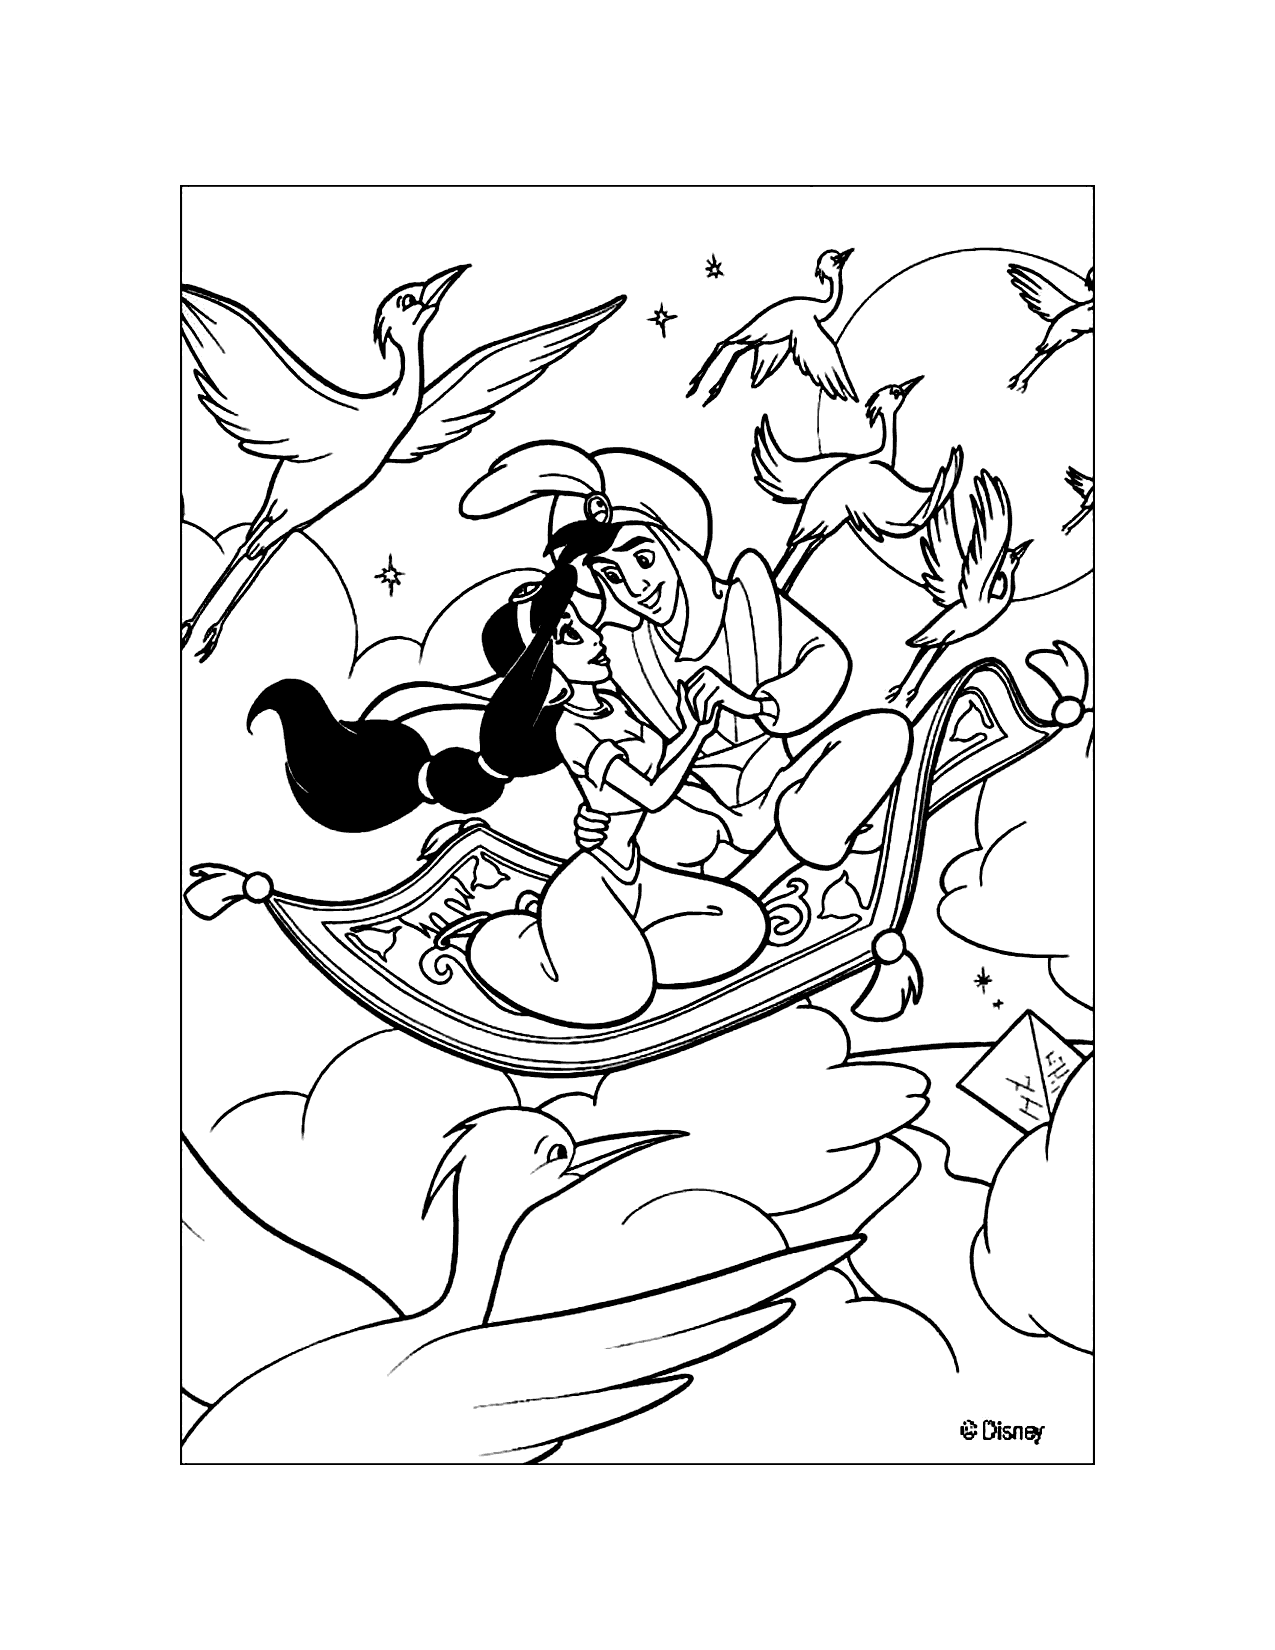 Aladdin Whole New World Coloring Page